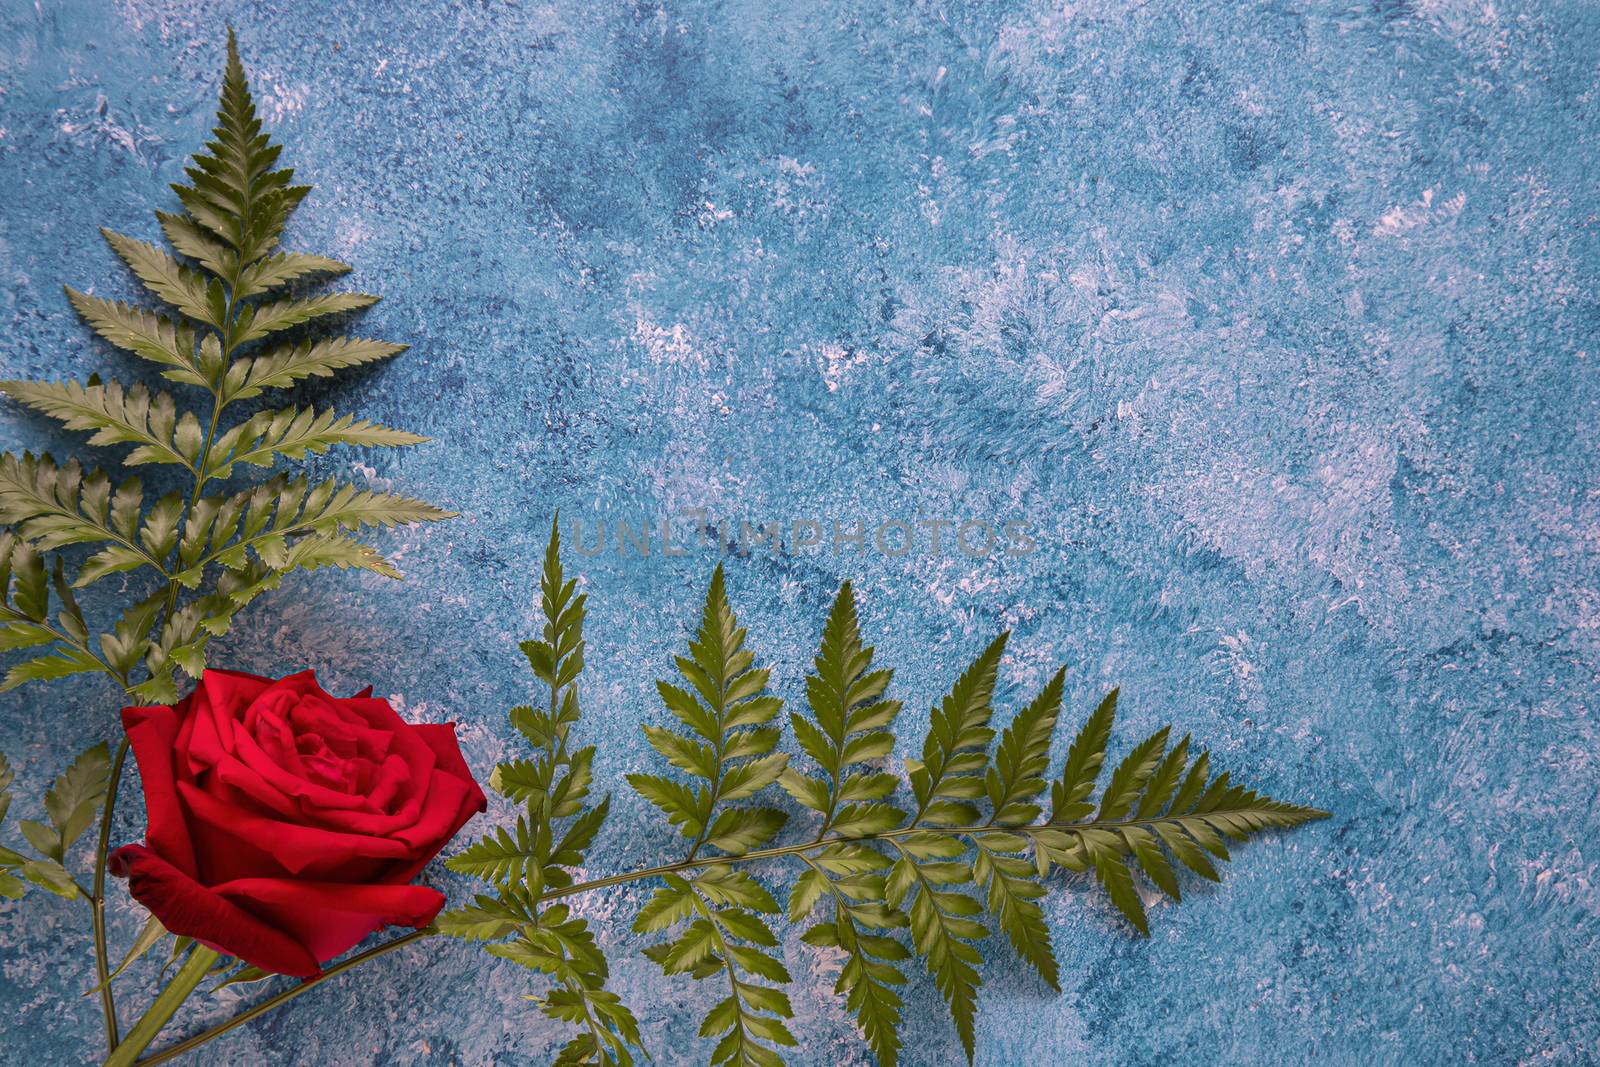 A beautiful single blooming red rose and green ferns on blue and white acrylic background.